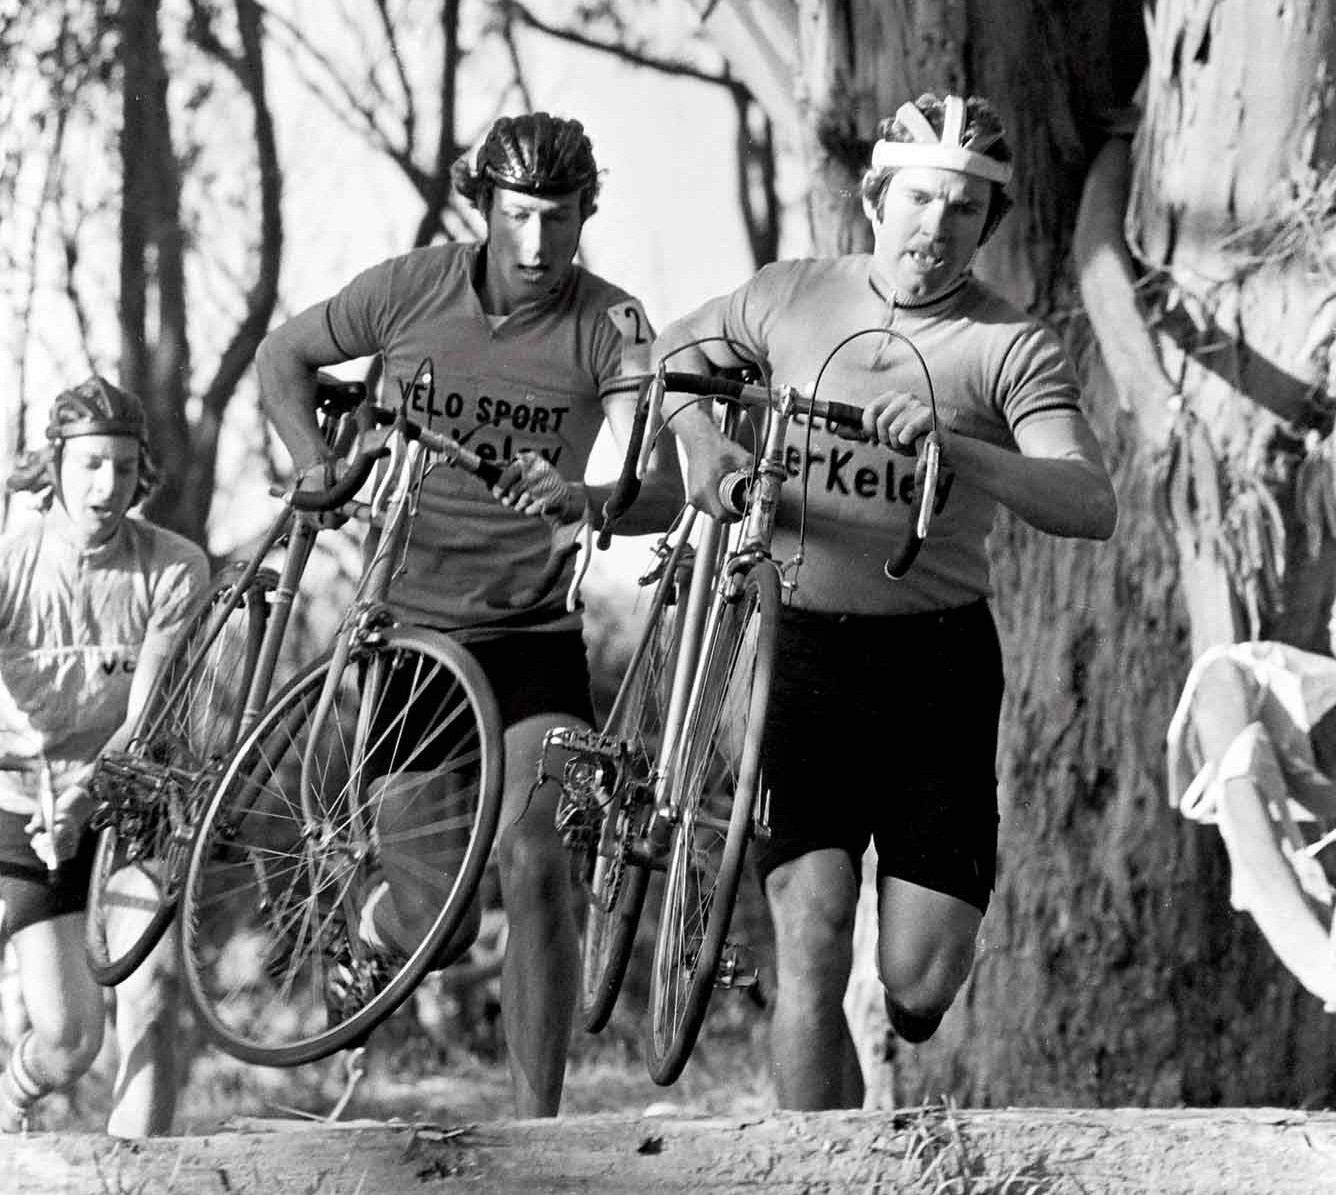 early american and european cyclocross courses were more rugged and improvised. (Ray Stafford)